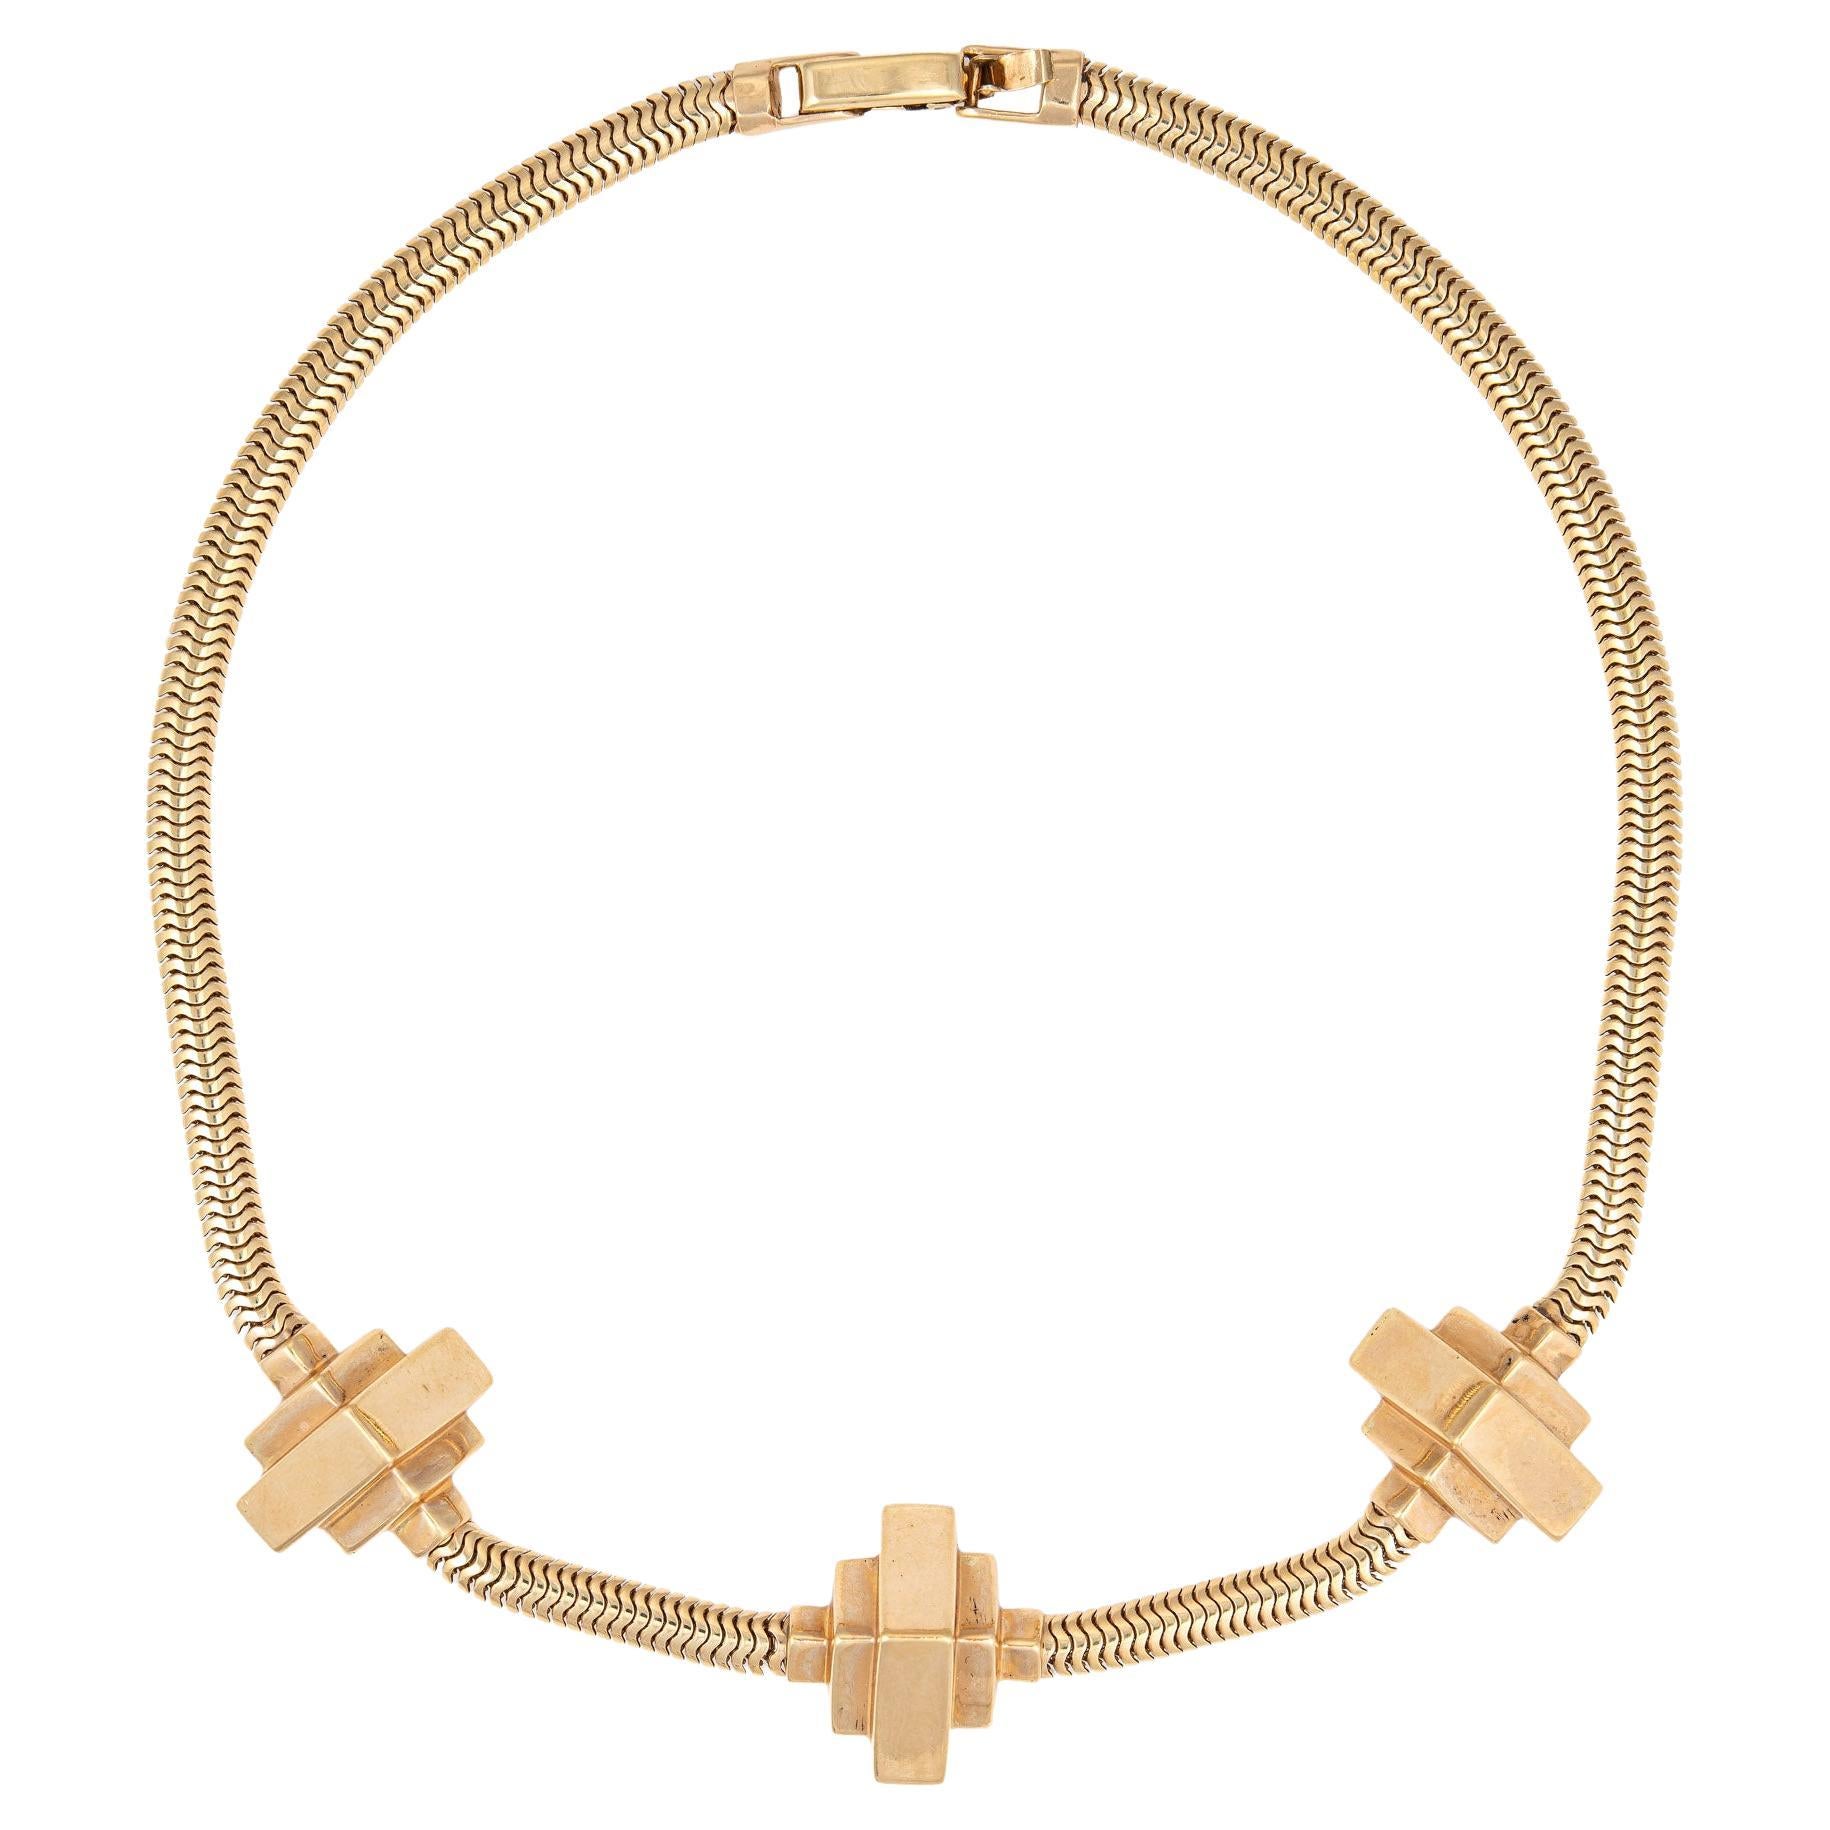 Retro 40s Necklace 14k Gold Snake Chain Geometric Stations